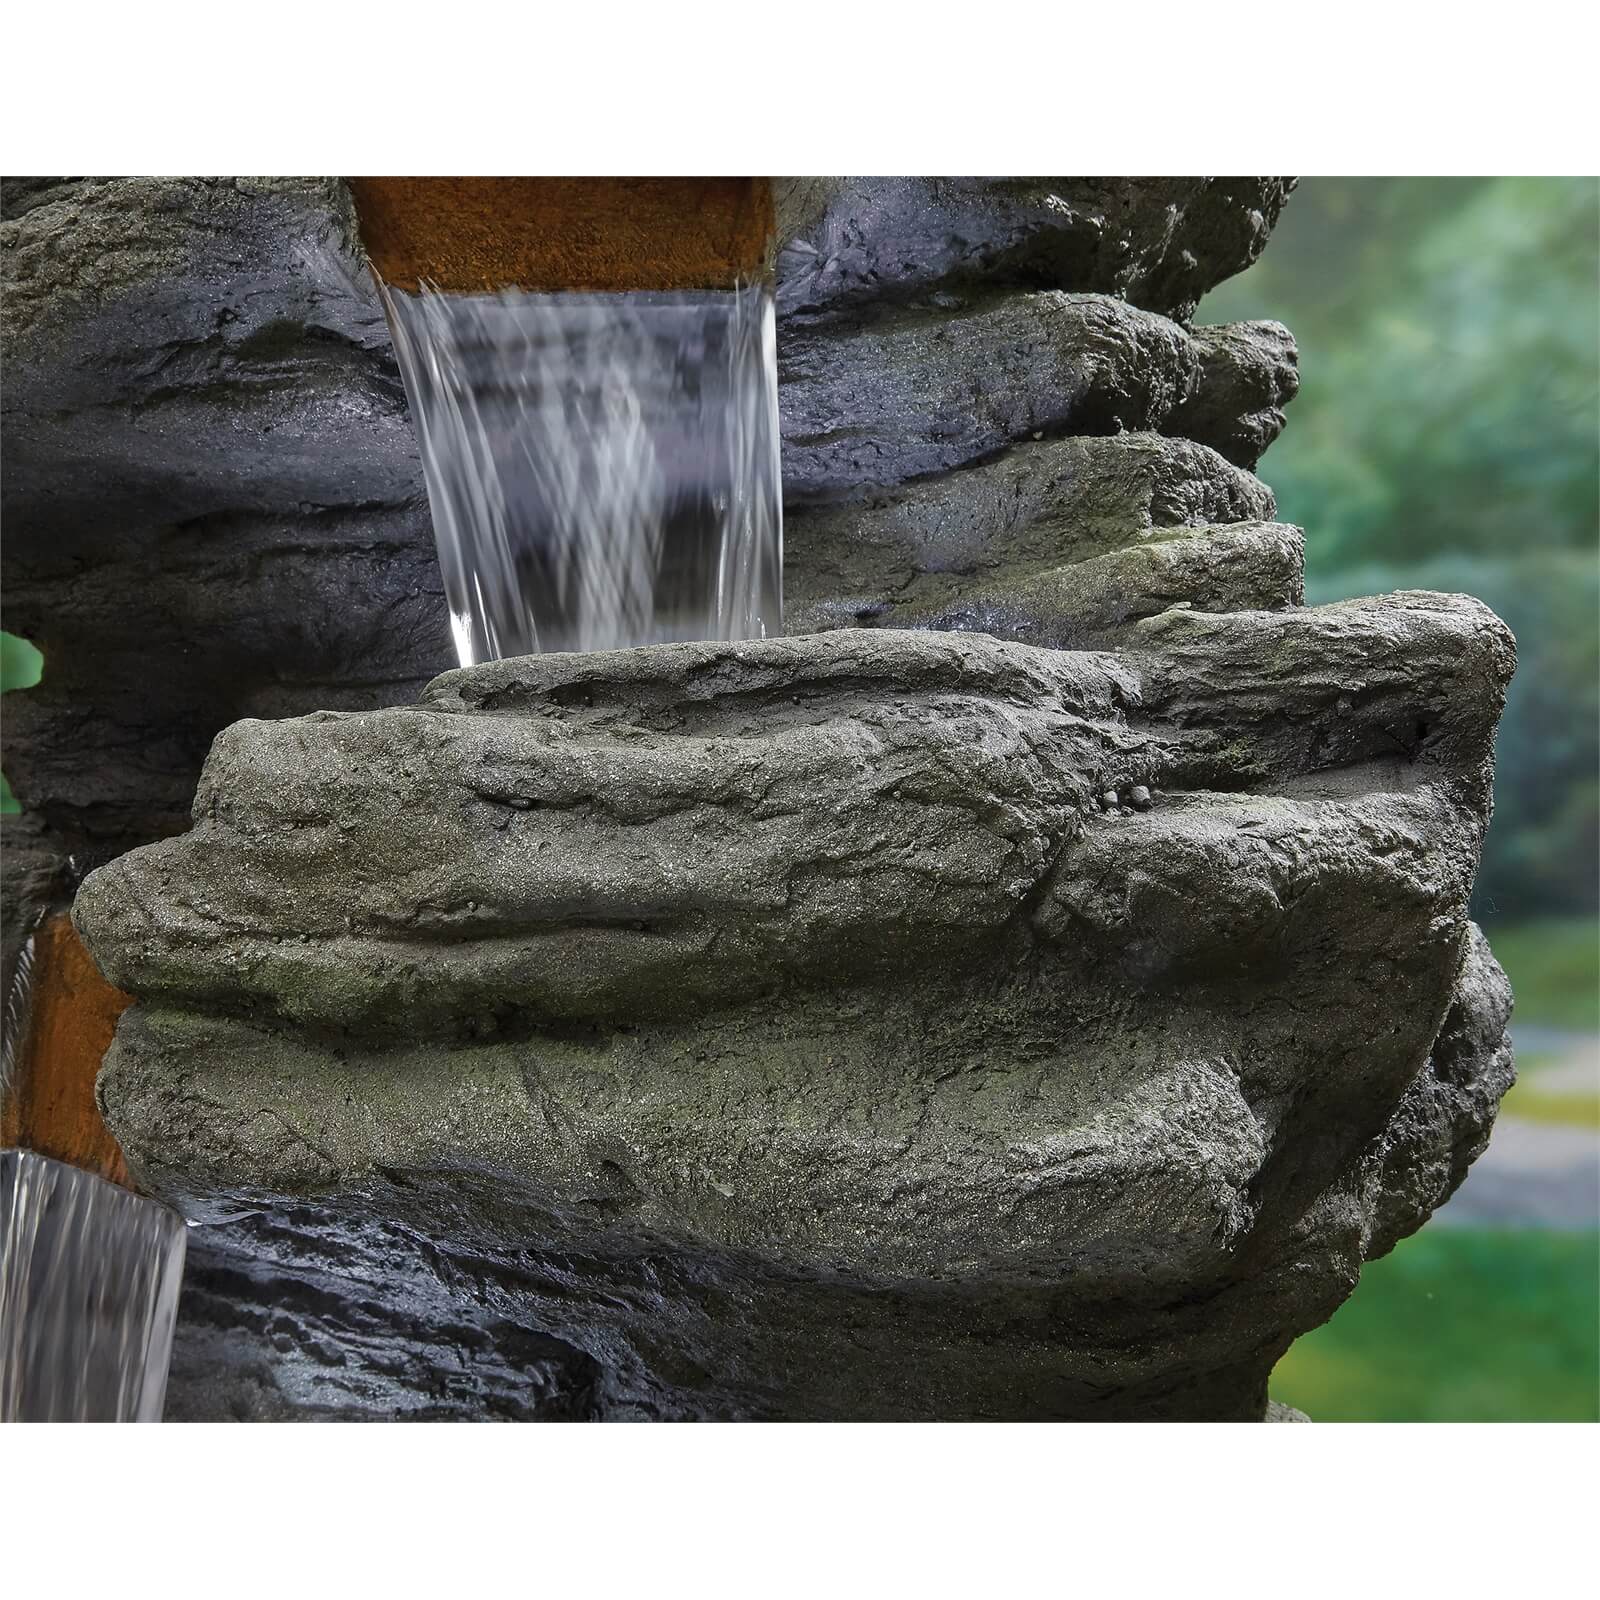 Stylish Fountains Atlas Falls Water Feature (Includes LEDS)